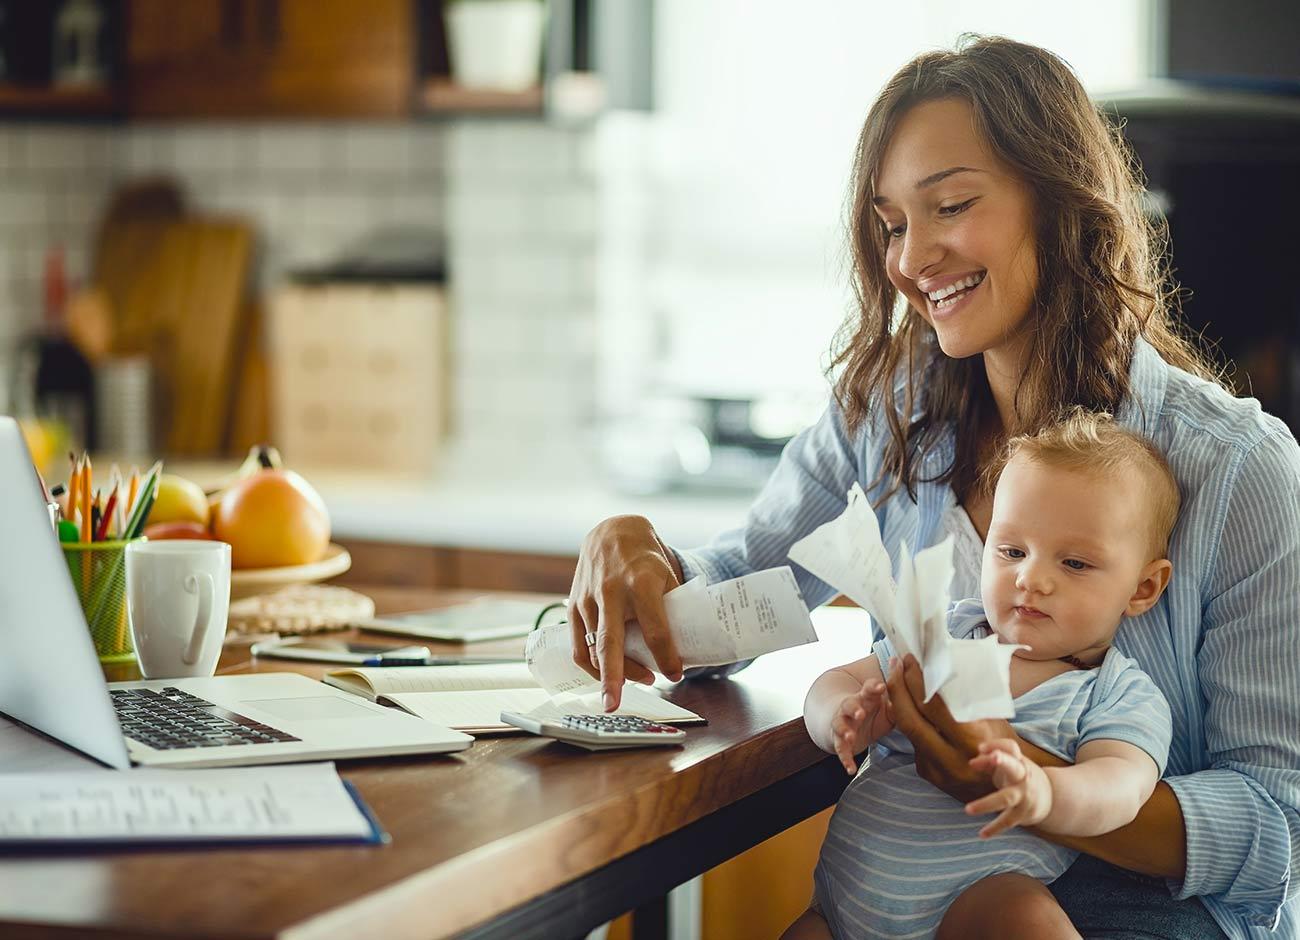 woman with baby paying bills at kitchen table